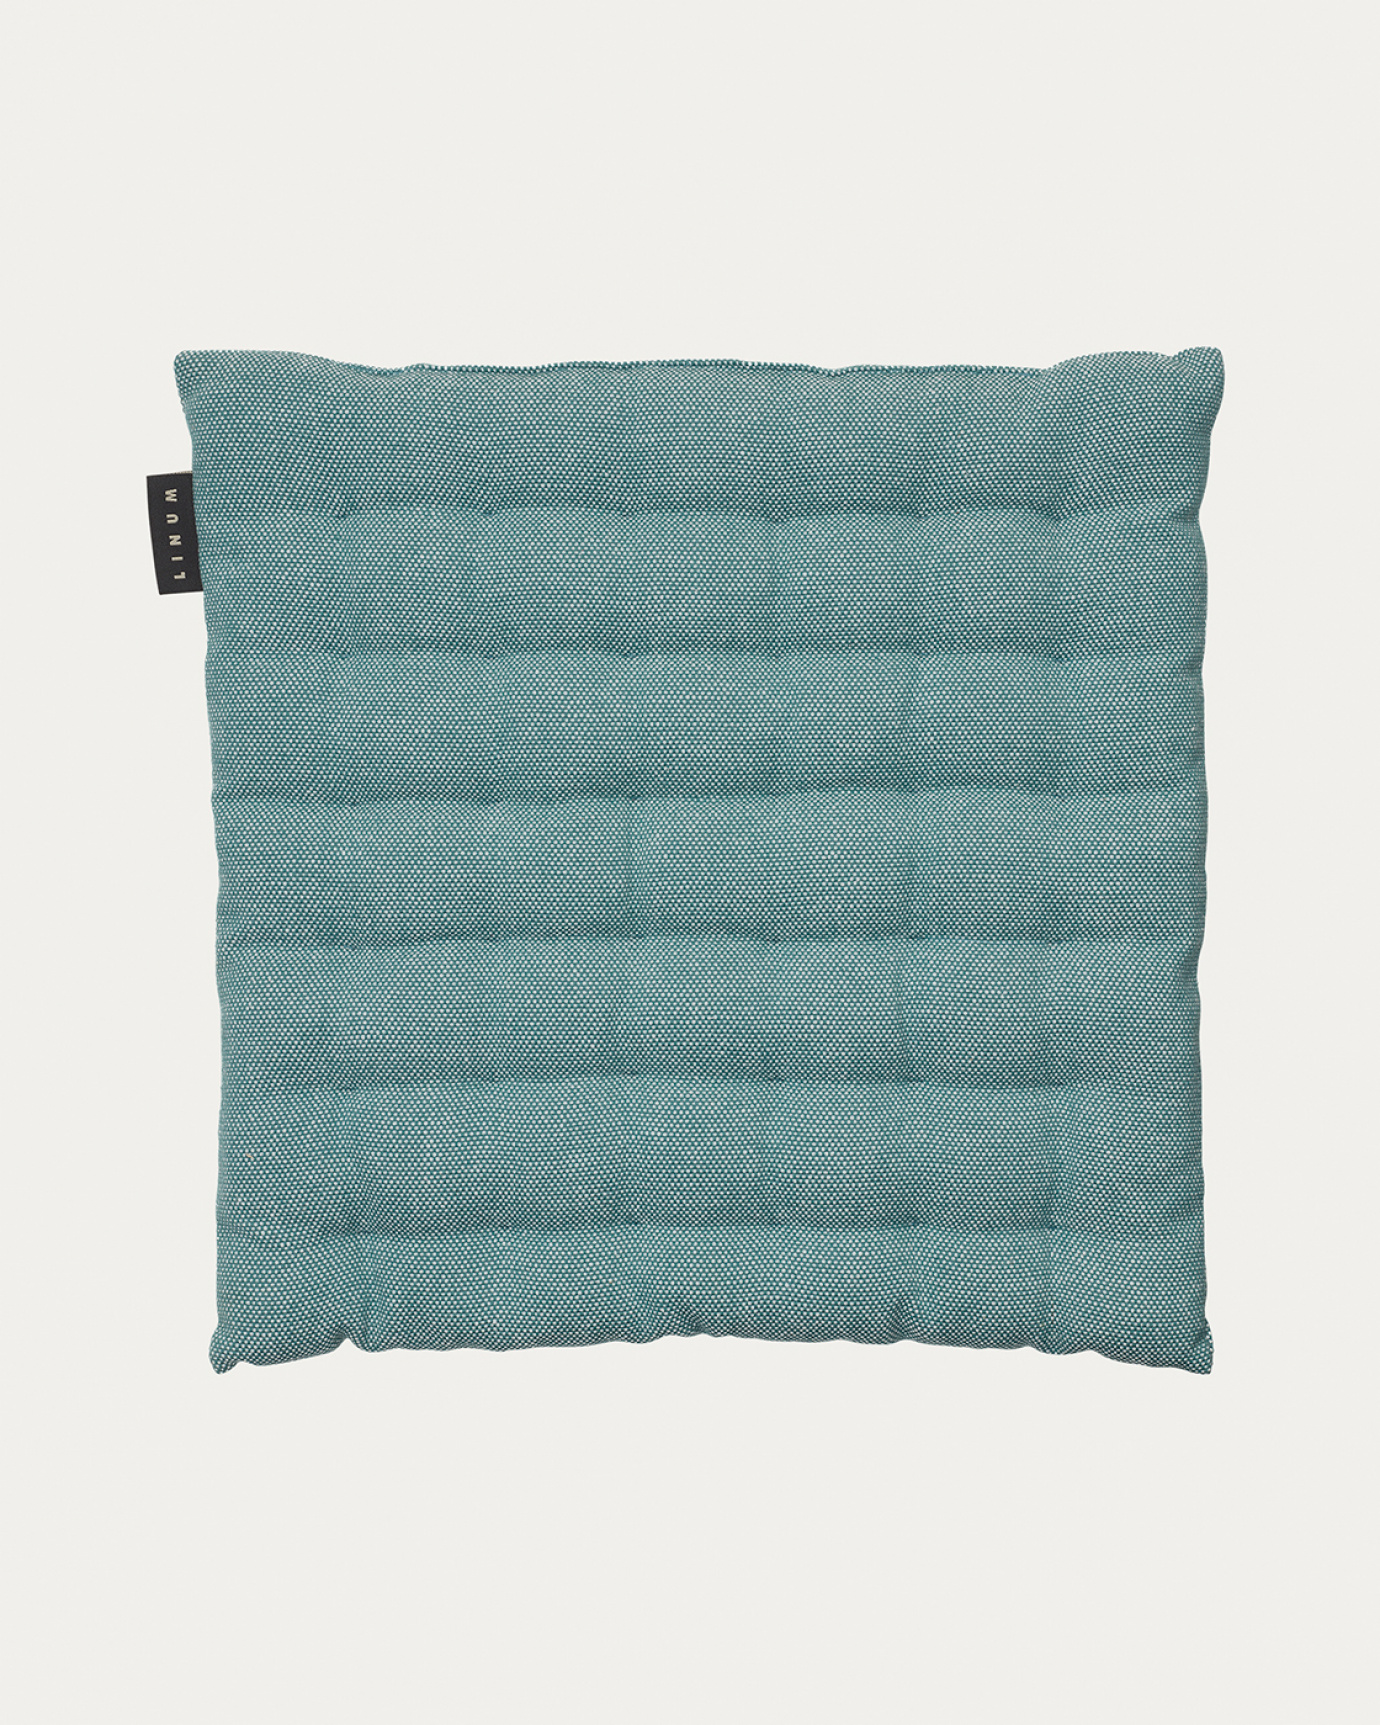 Product image dark grey turquoise PEPPER seat cushion made of soft cotton with recycled polyester filling from LINUM DESIGN. Size 40x40 cm.